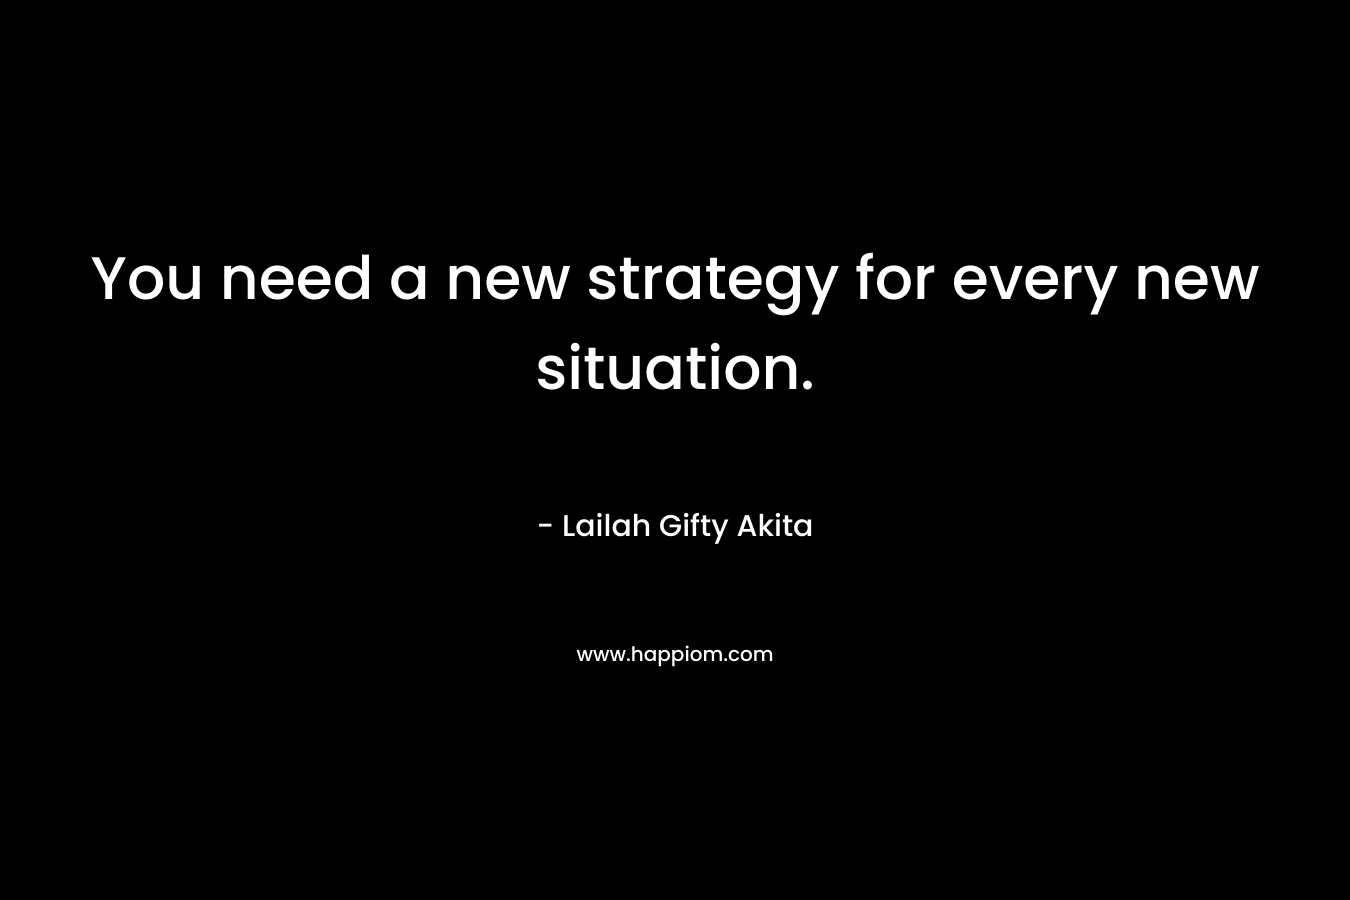 You need a new strategy for every new situation.